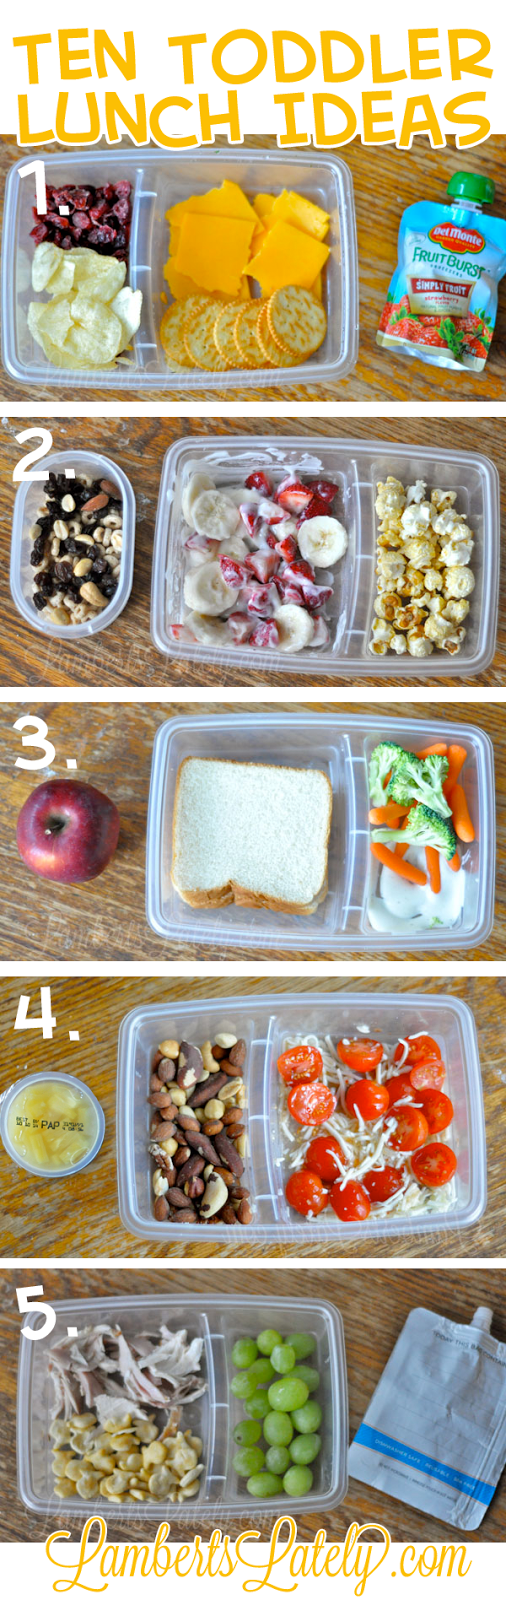 Ten (Quick and Easy) Toddler School Lunch Ideas (Brought to you by Del Monte)